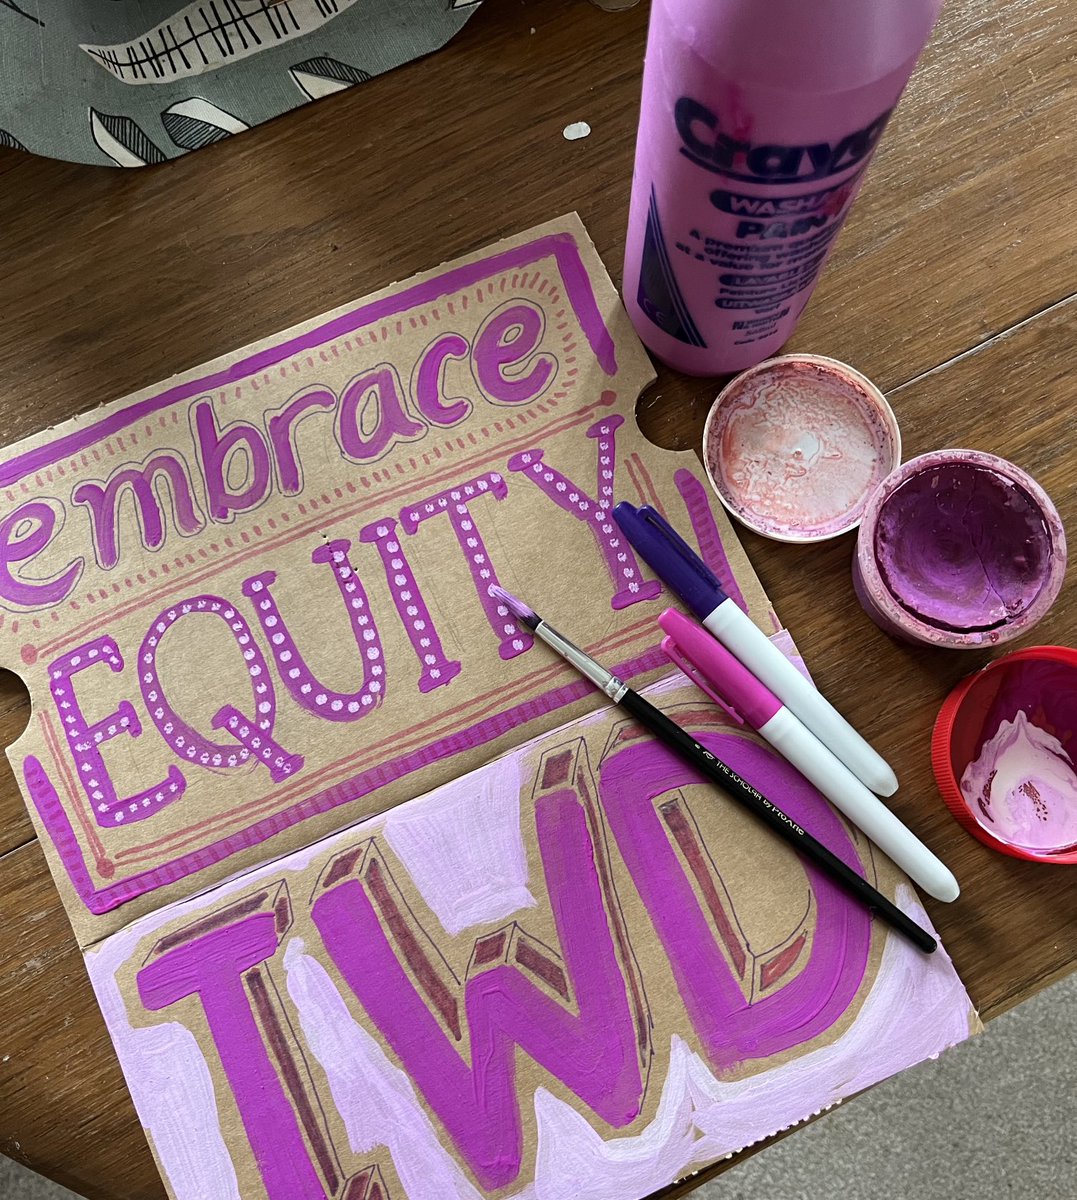 calling all educators 📢 ! come and play with paint&typography!learn how 2design and make the BEST (& cheapest)social justice placards on Tuesday 7th mar 3-5 an afternoon of #artsaction 4 #InternationaWomensDay 🎨✊🌏#artsactivism ⁦@StrathUnion⁩ ⁦@StrathEDU⁩